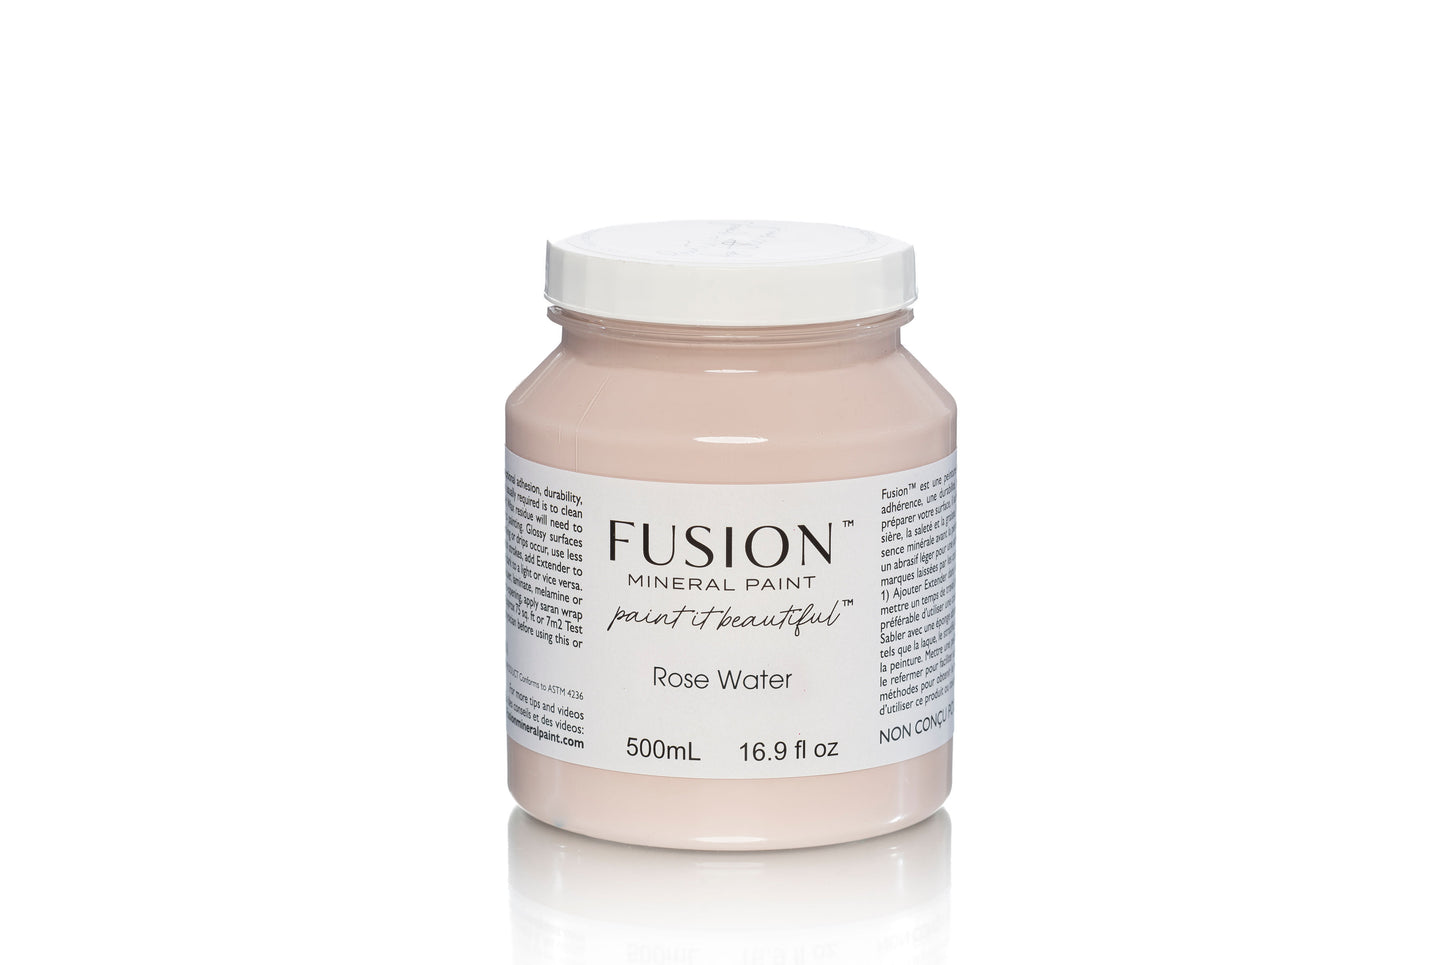 FUSION MINERAL PAINT- Rose Water